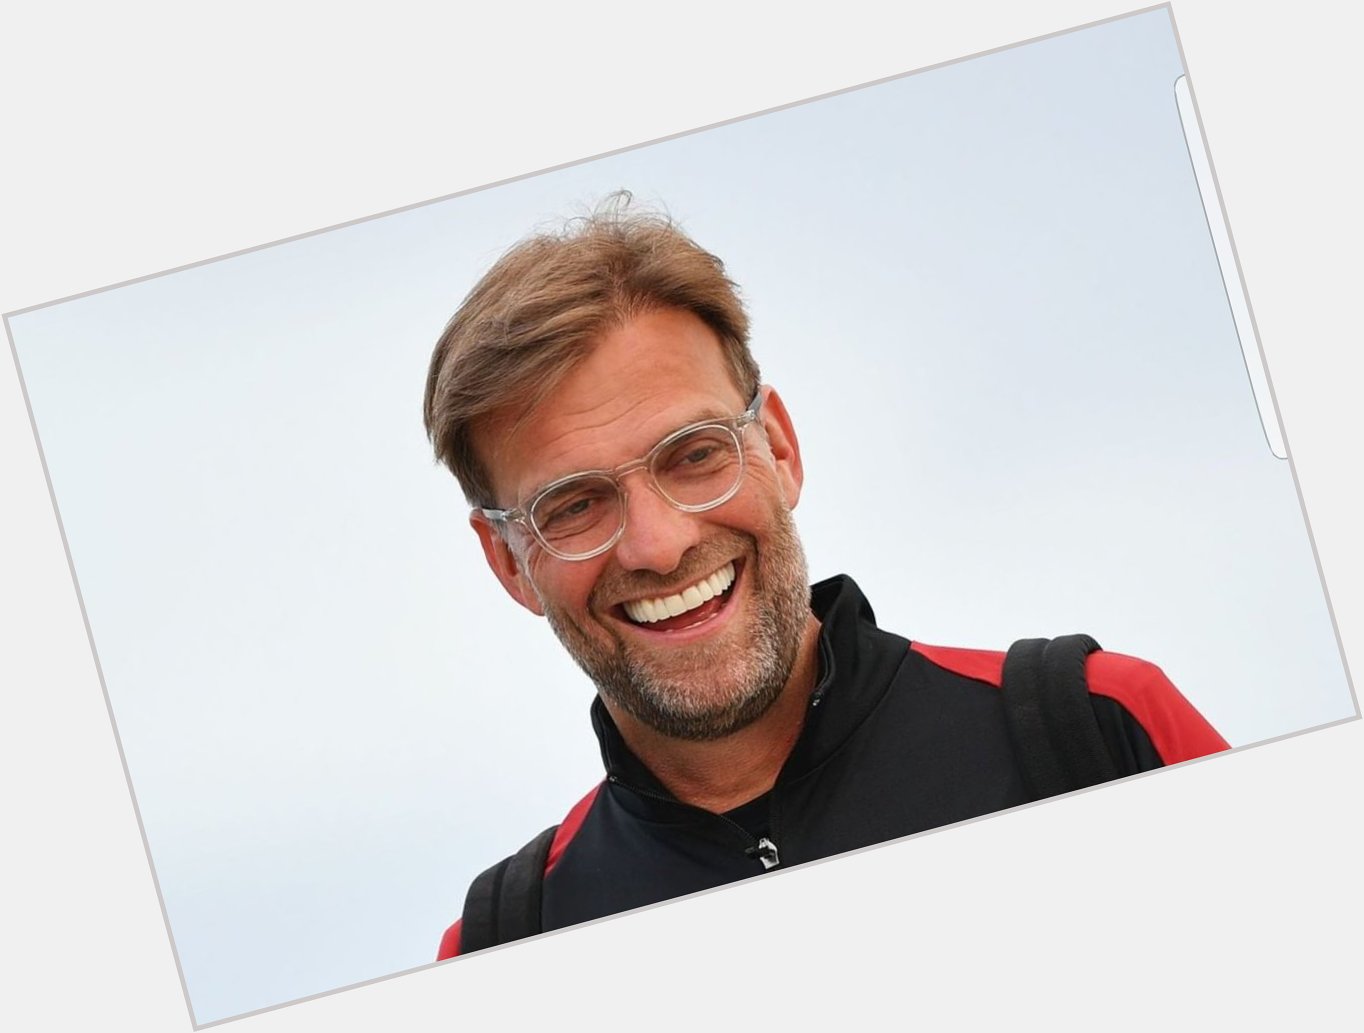 Jurgen Klopp is celebrating his special day! Join in wishing him a Happy Birthday! 